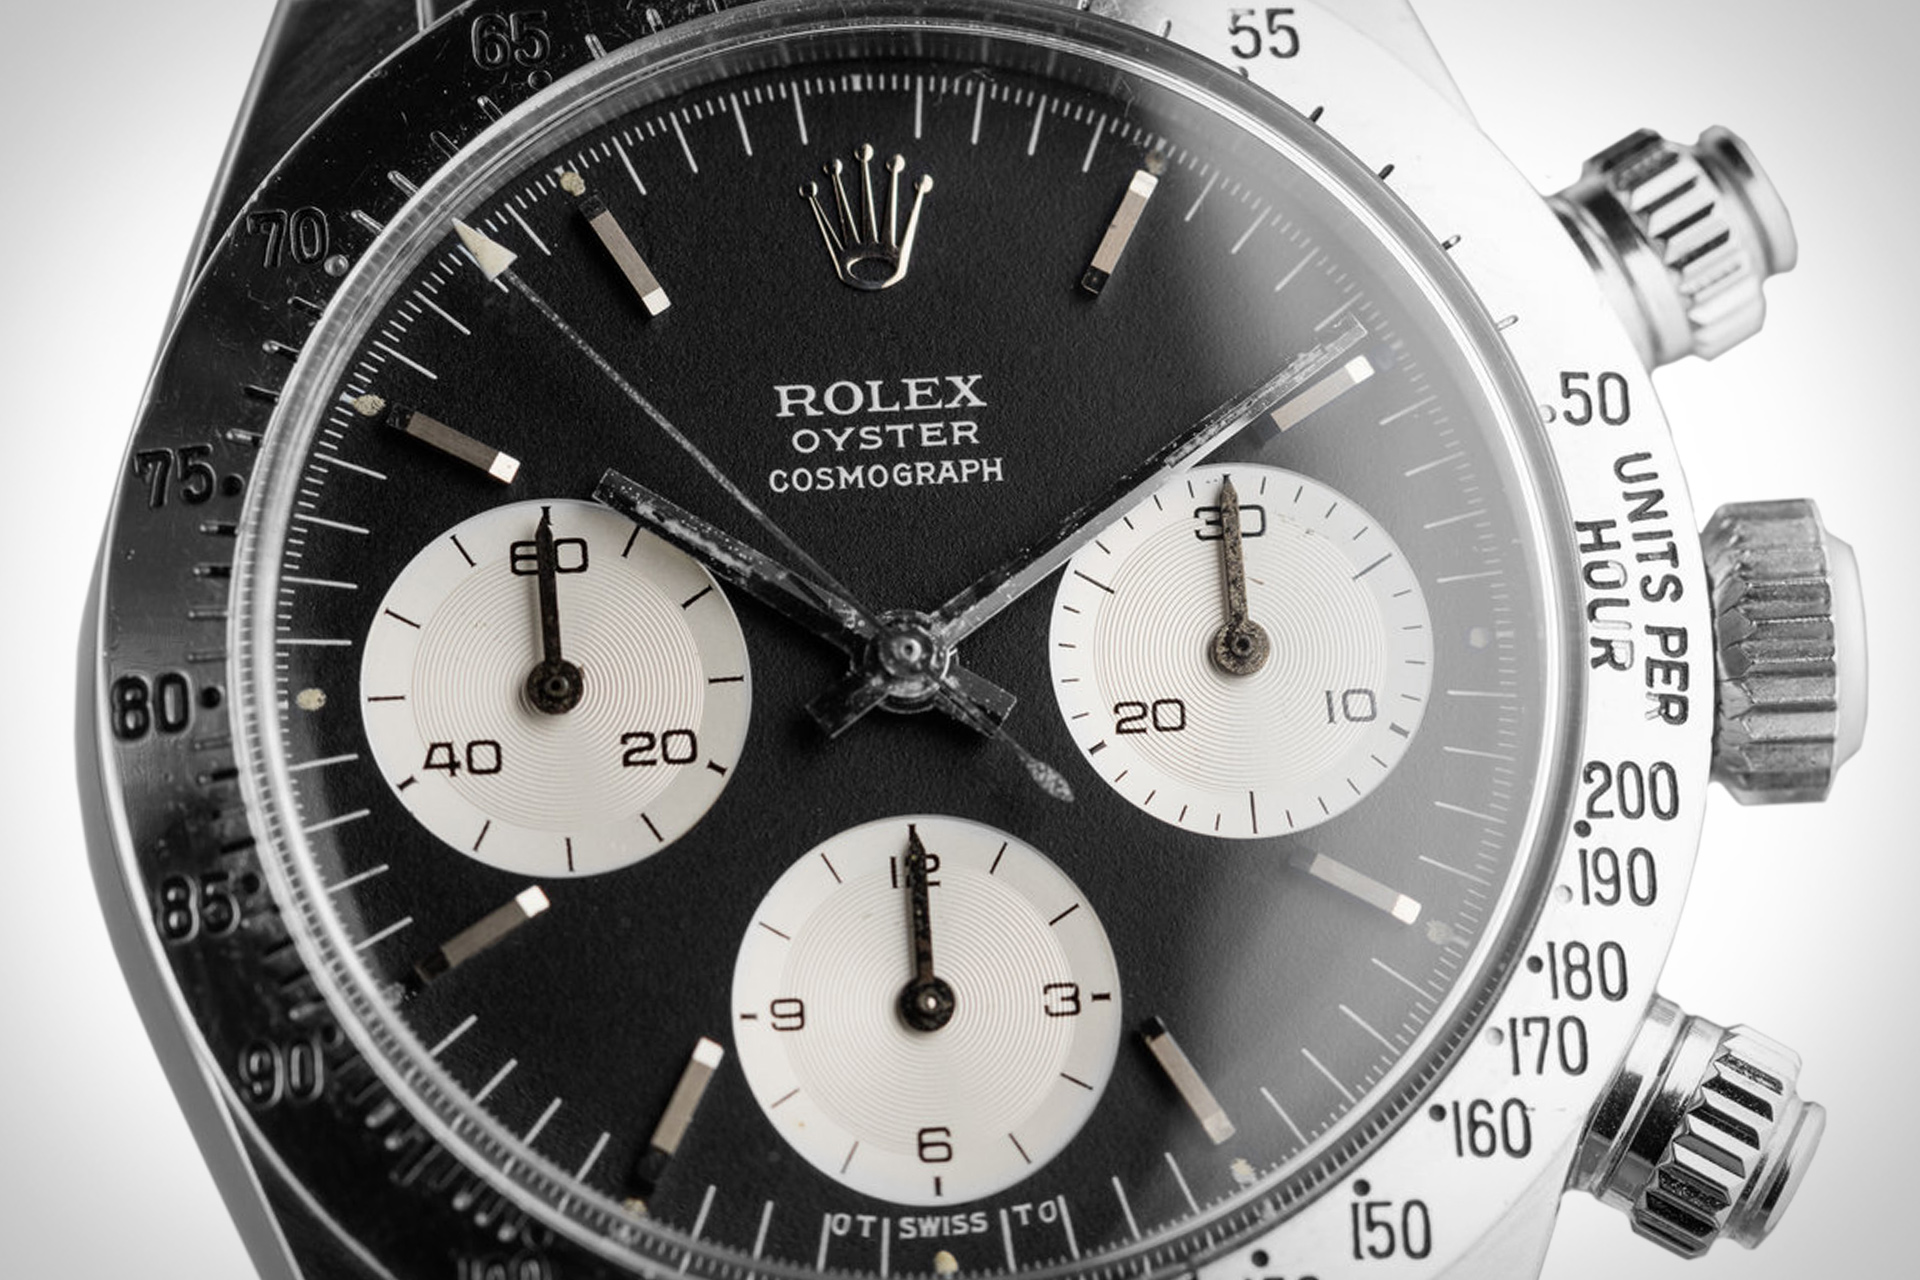 1973 Rolex Daytona Reference 6265 Watch | Uncrate